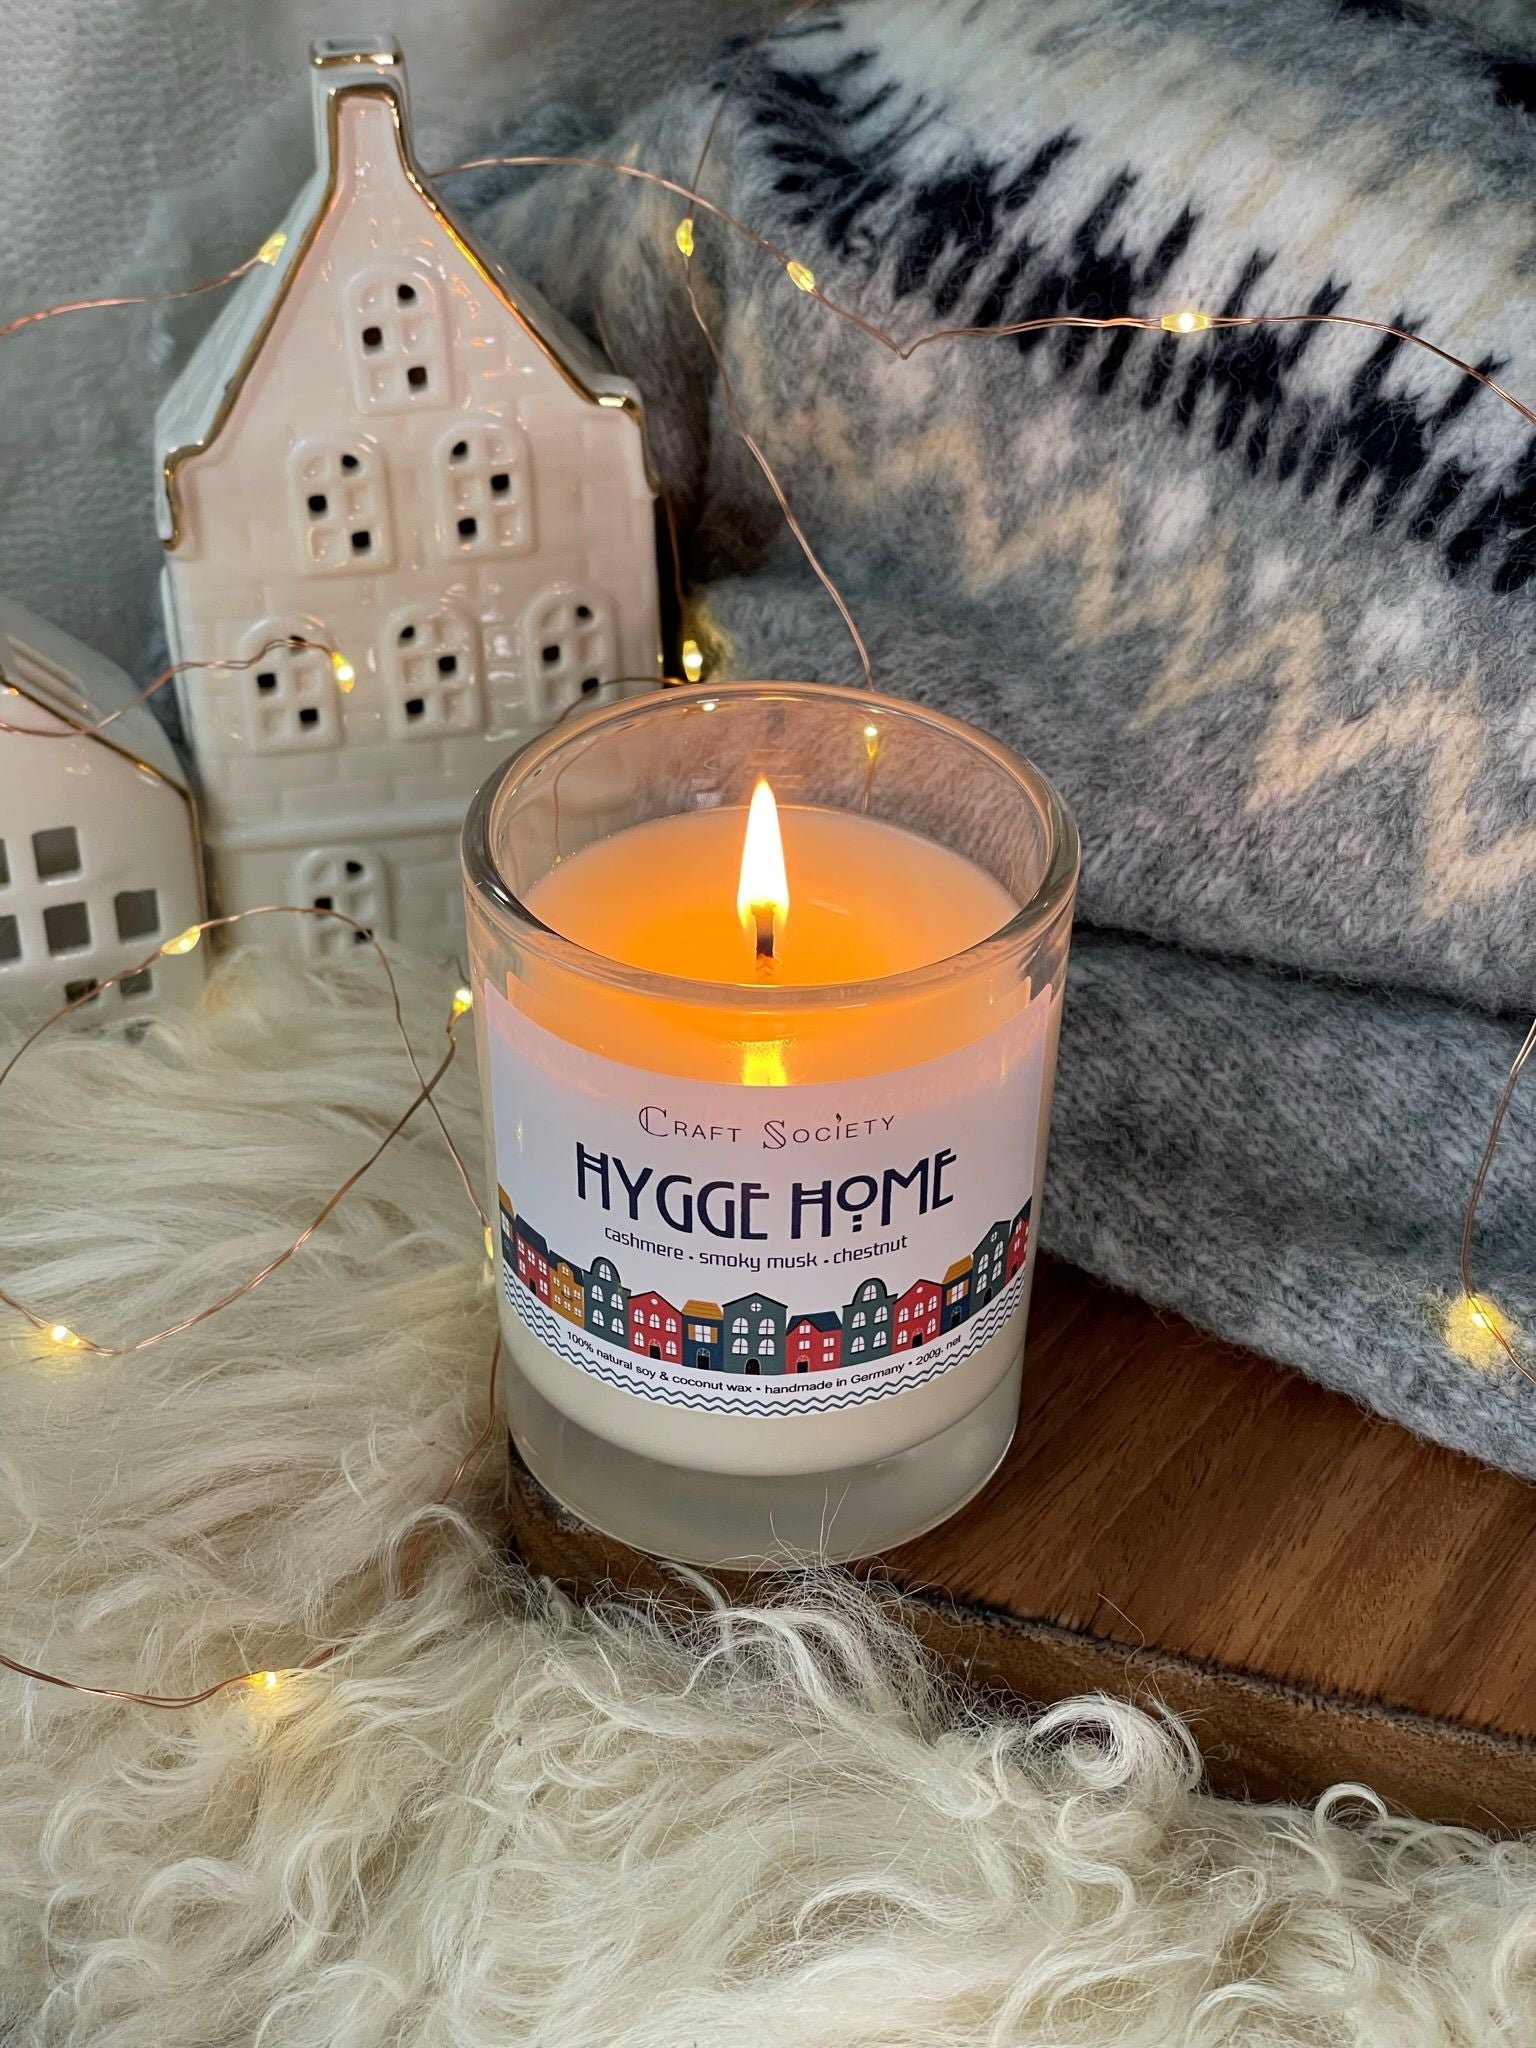 A burning scented candle made with premium fragrance oils on a decorated background